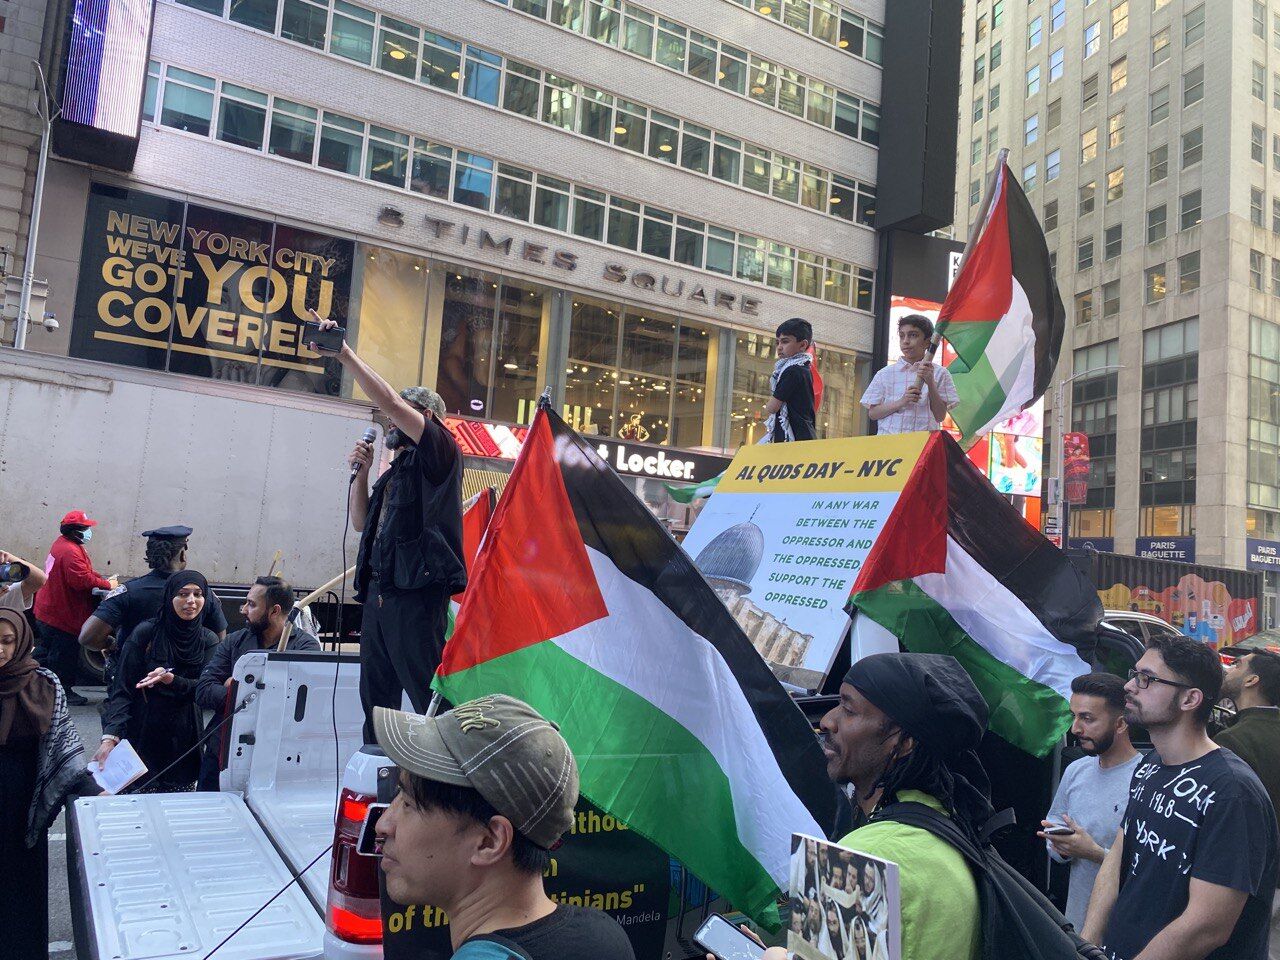 Muslims, Jews gather in Times Square to mark Int'l Quds Day